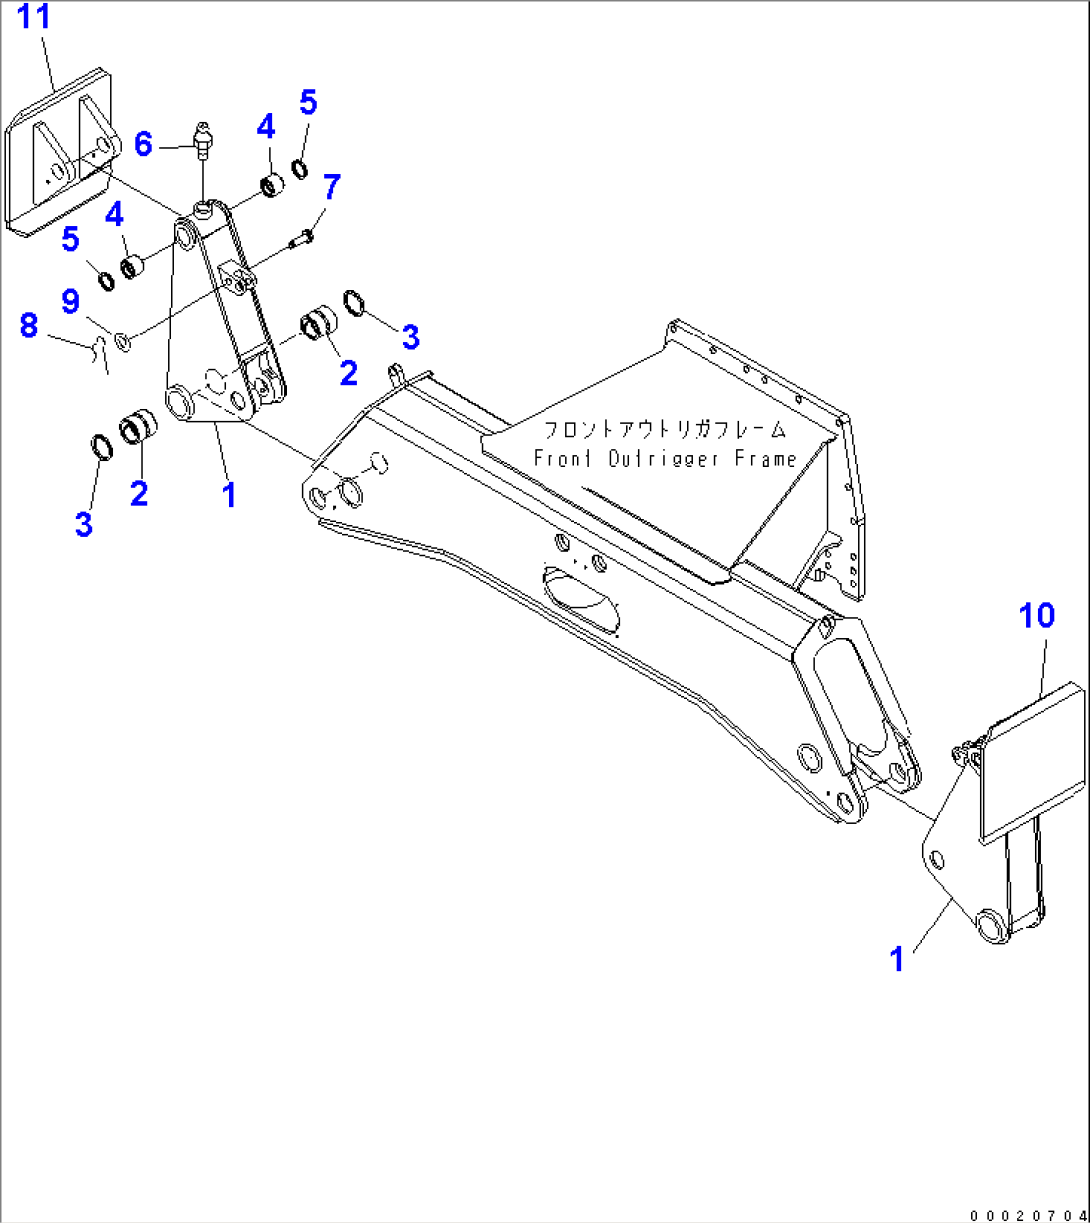 OUTRIGGER (LEGS AND FOOT) (FOR FRONT OUTRIGGER)